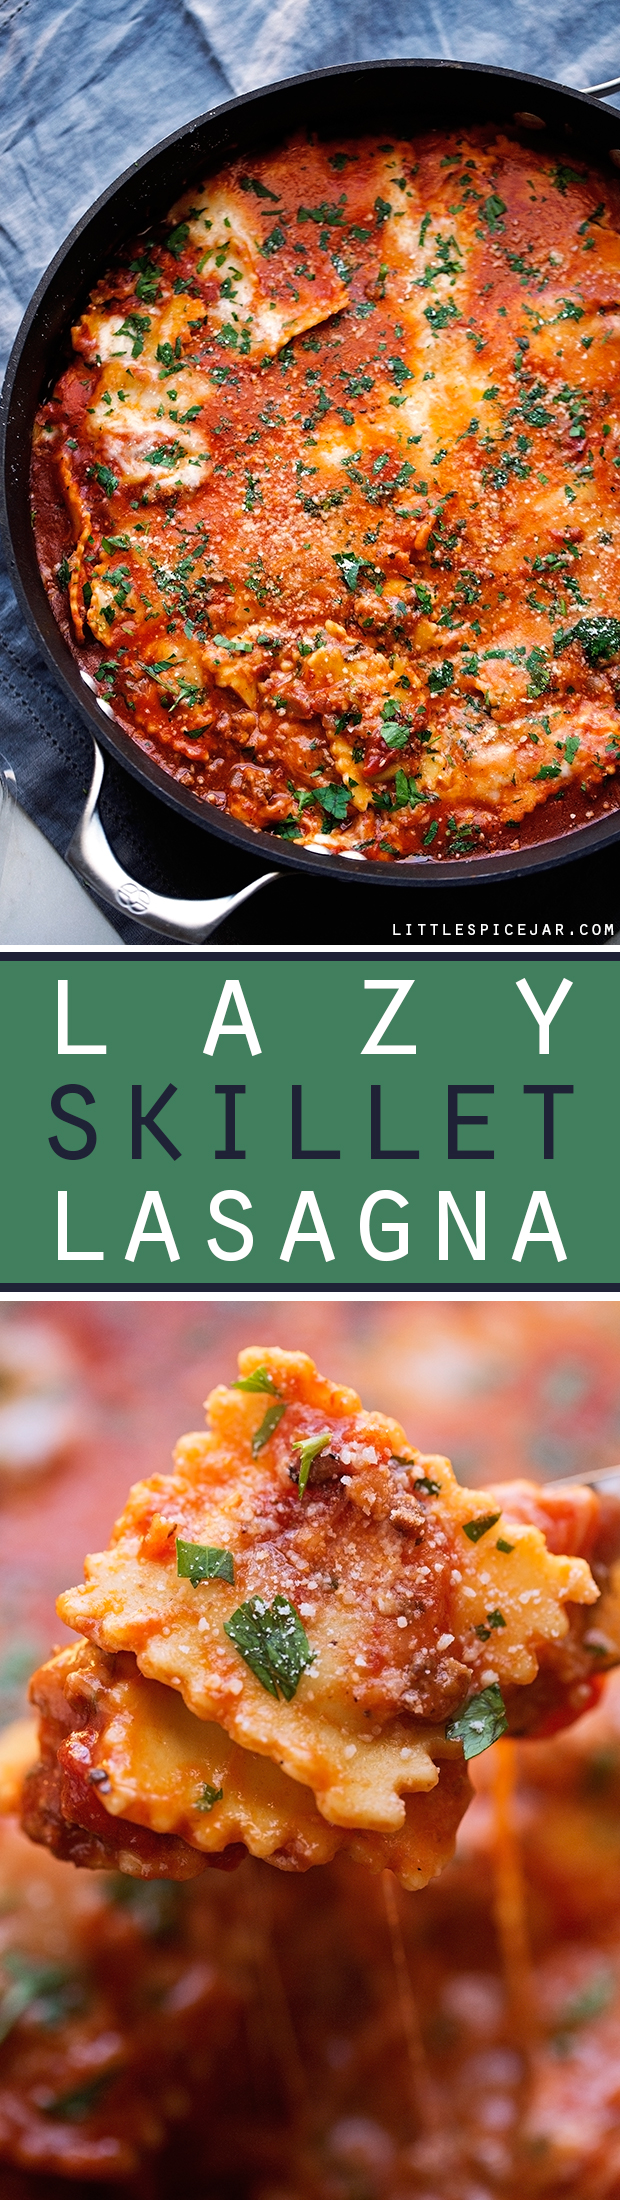 lazy Skillet Lasagna - the easiest way to make lasagna all in one pot! Ready in just over 30 minutes! #onepotlasagna #skilletlasagna #nobakelasagna | Littlespicejar.com